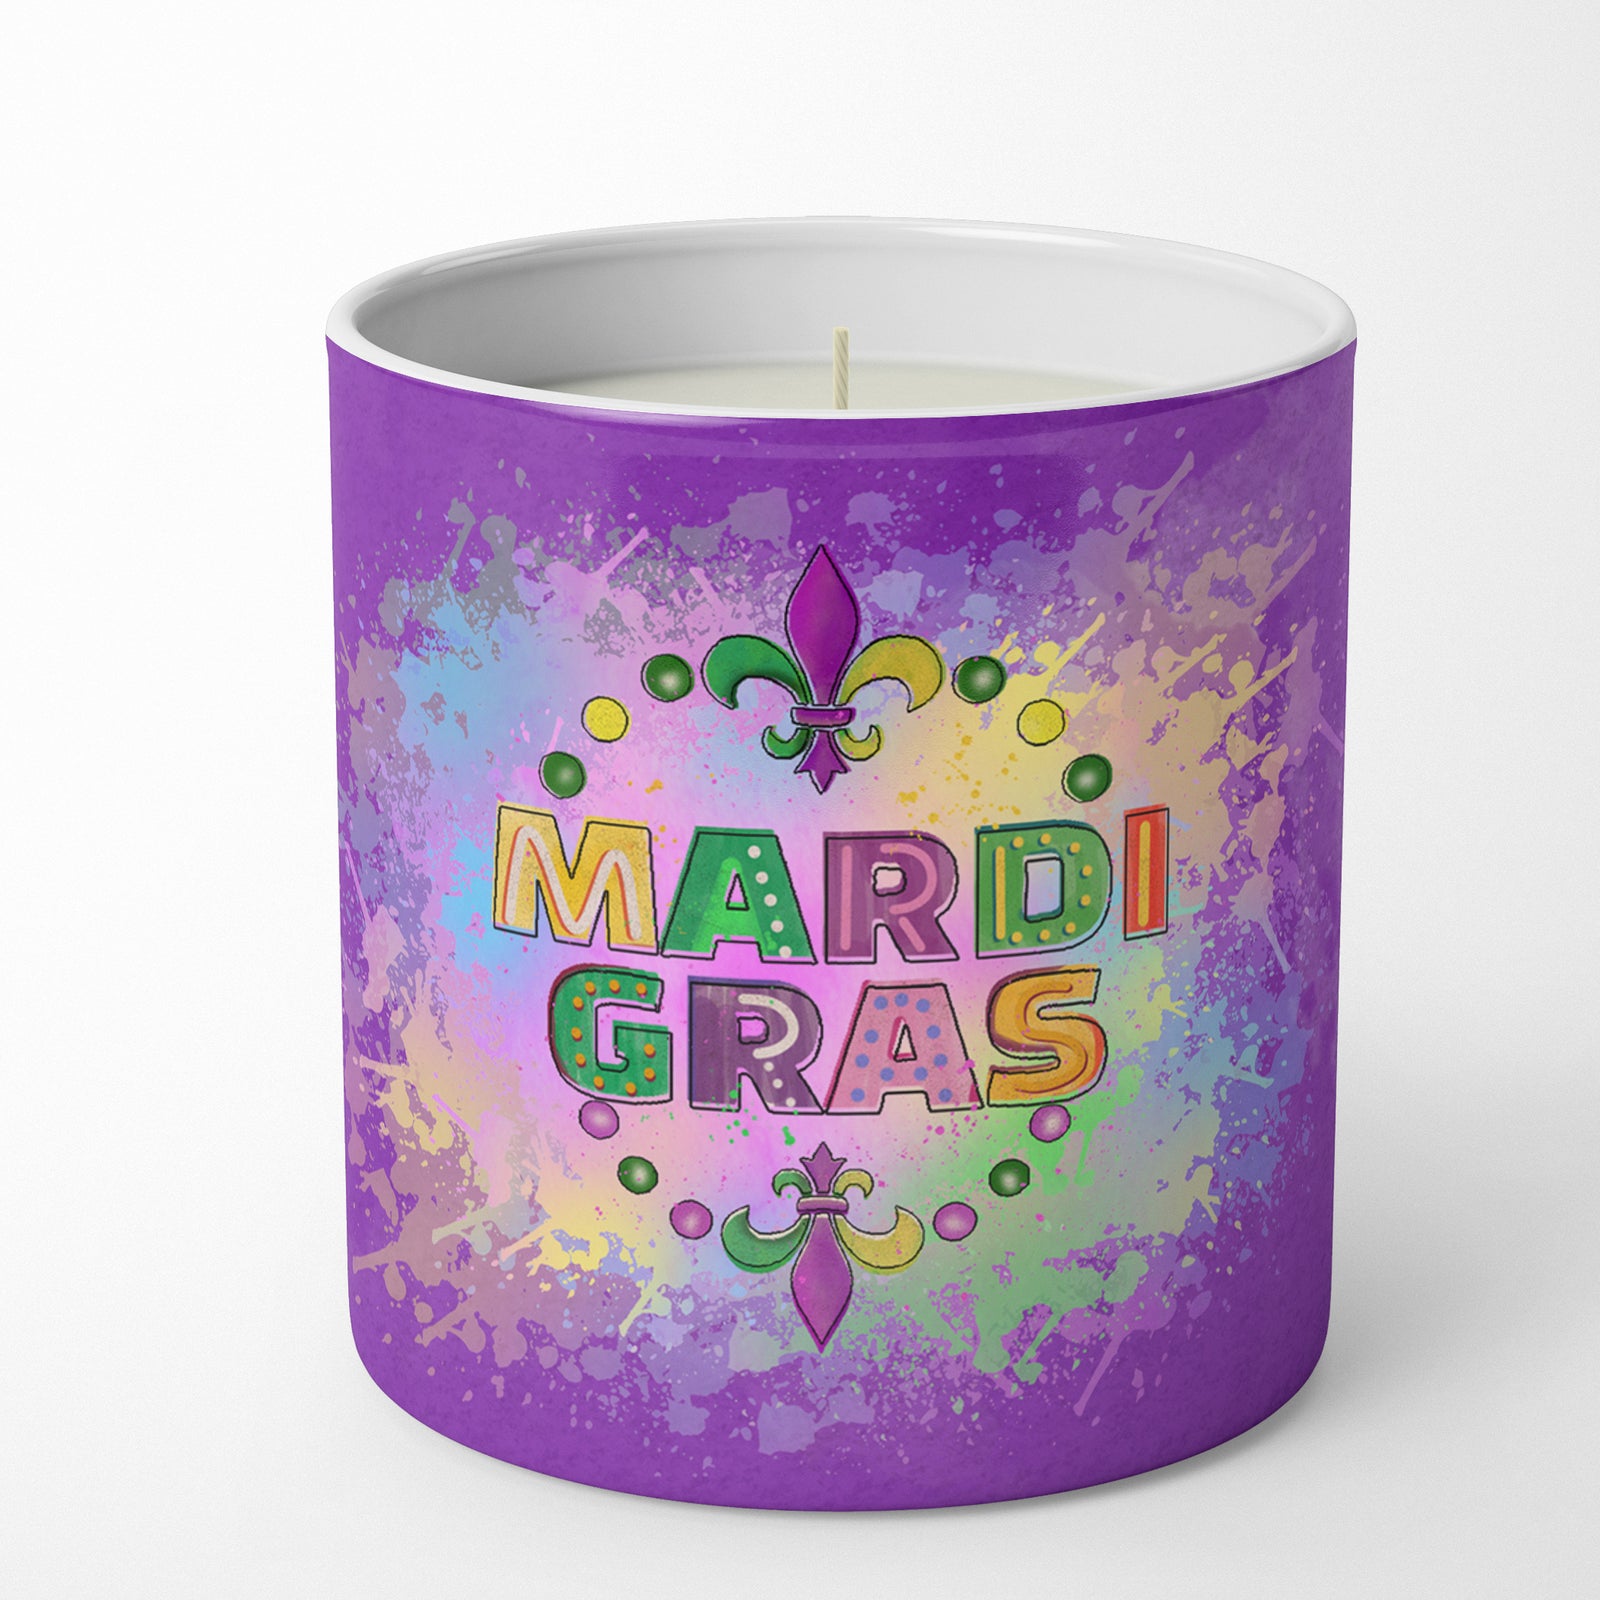 Buy this Mardi Gras 10 oz Decorative Soy Candle